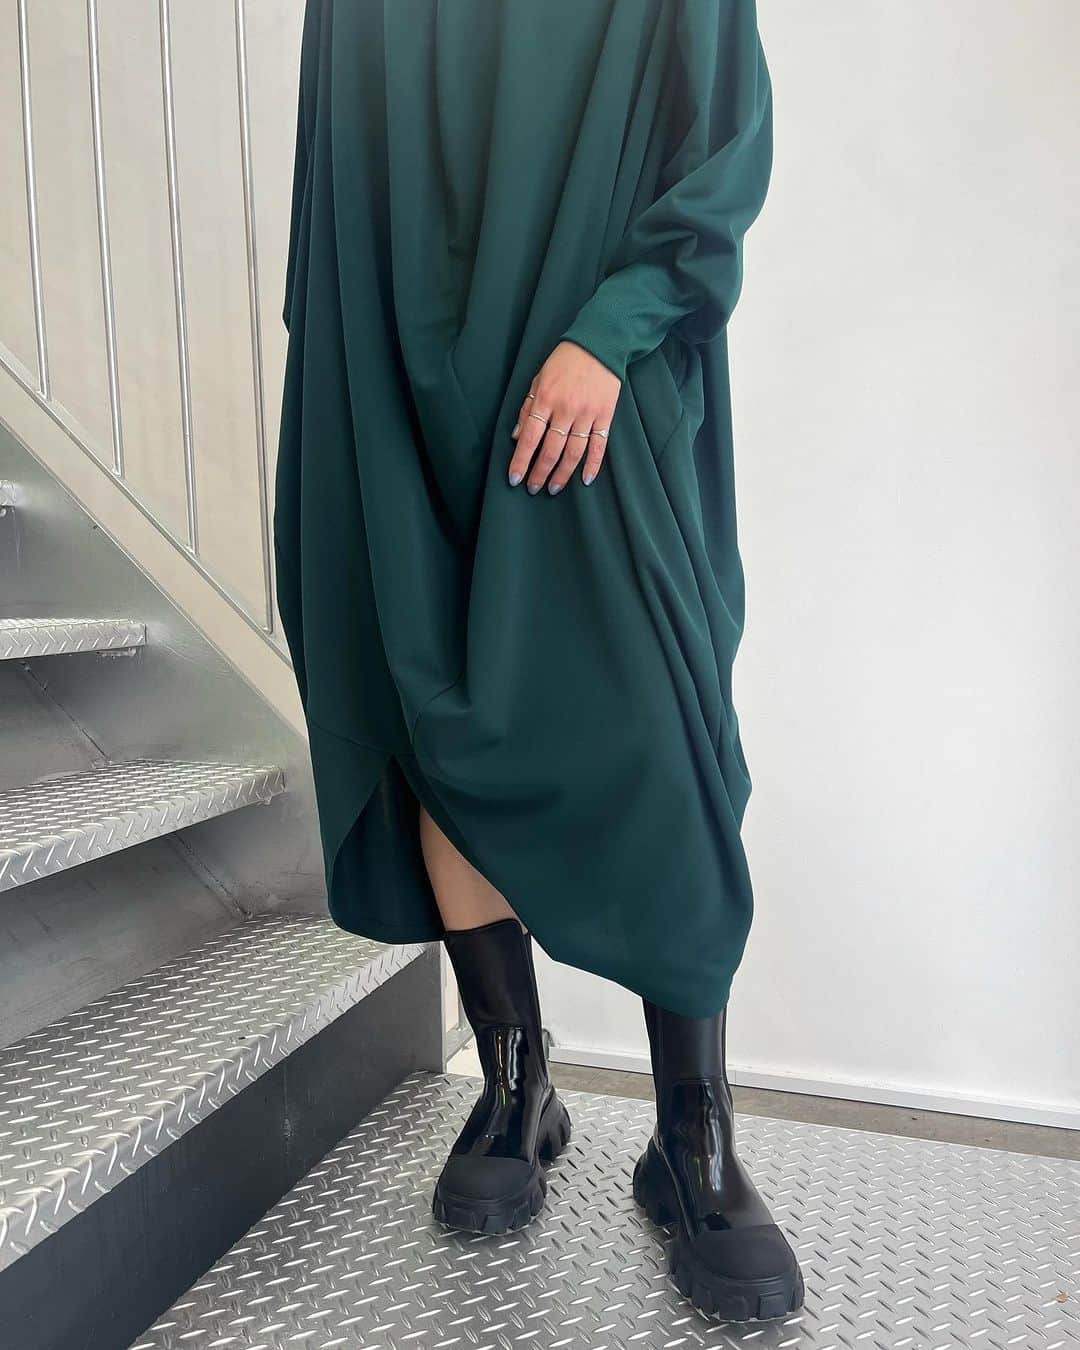 MIDWEST TOKYO WOMENのインスタグラム：「. 【onepiece】 ball mutton sleeve dress @anrealage_official green,black / size 40  【shoes】 viviano×lost in echo chelsea boots @vivianostudio black,pink,red / size 37-39  @midwest_tw staff 160cm」